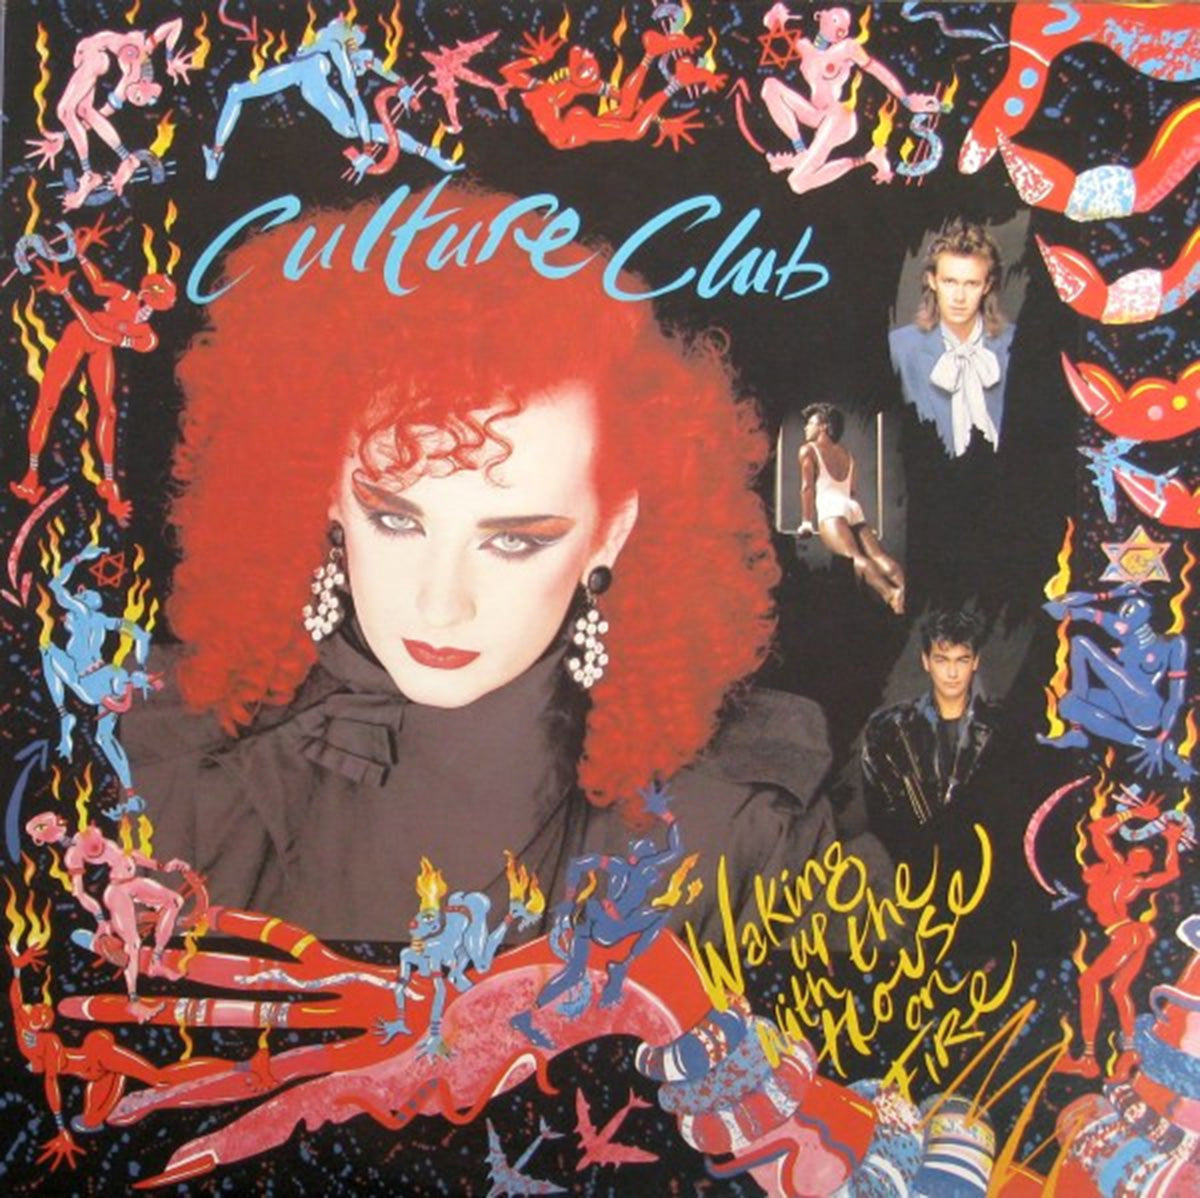 Culture Club – Waking Up With The House On Fire - 1984